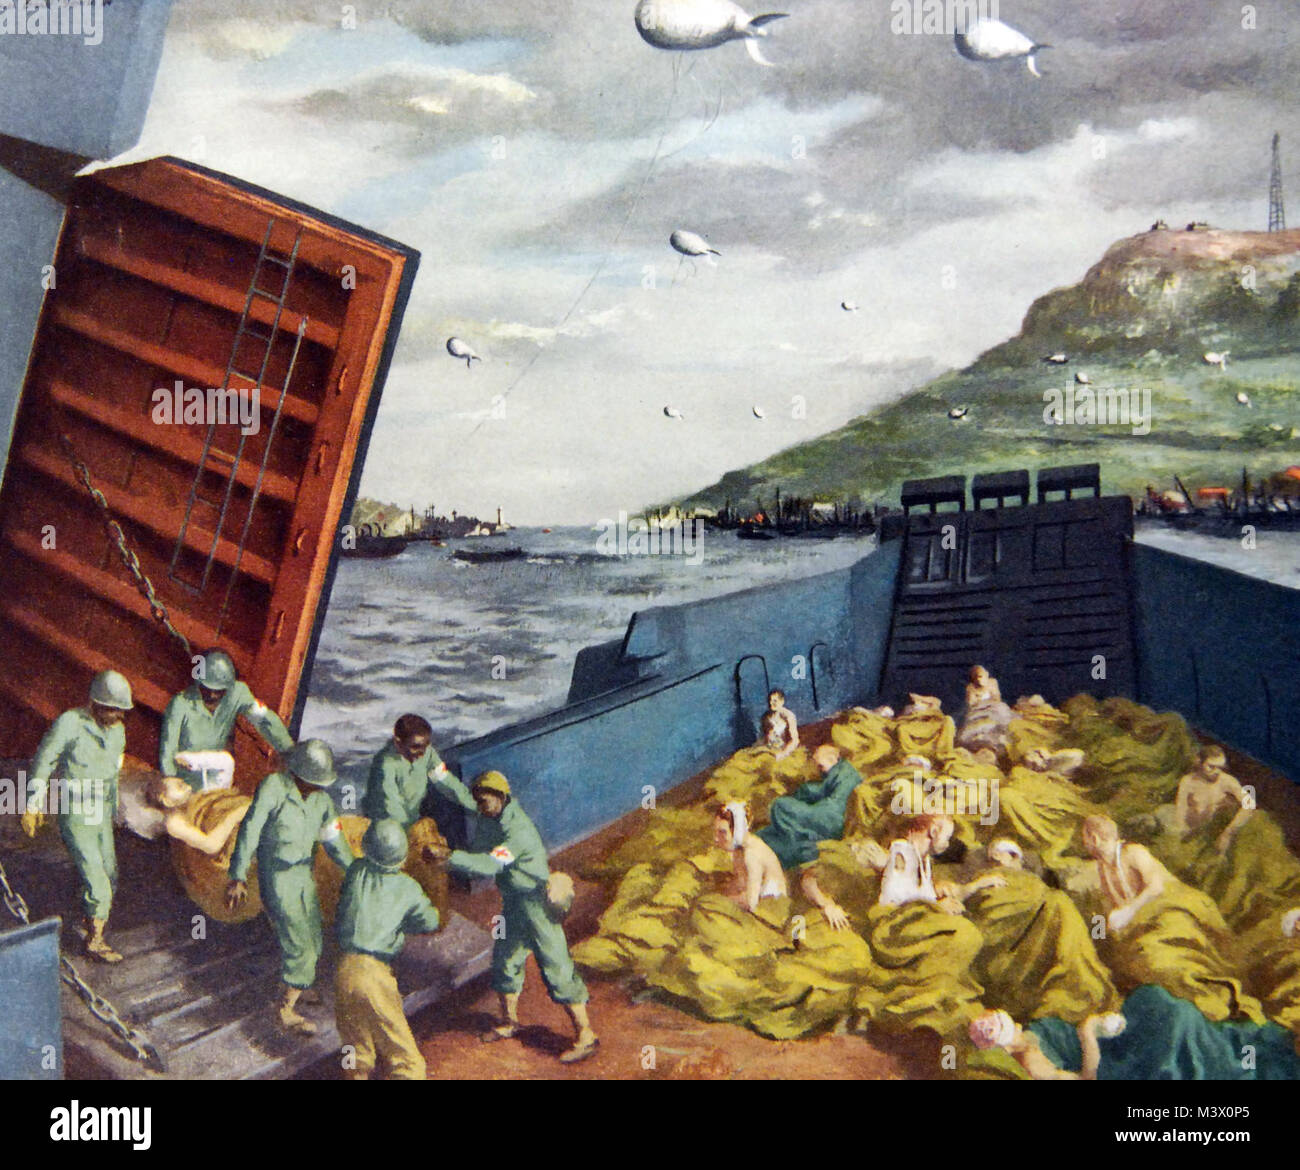 Lot-7409-16:  WWII:  Paintings of Army Medicine.  “Normandy Victory Cargo.”   Artwork by Lawrence Beale Smith.    Abbott Laboratories.  Courtesy of the Library of Congress.  (2018/02/02). Lot-7409-16 40012591192 o Stock Photo